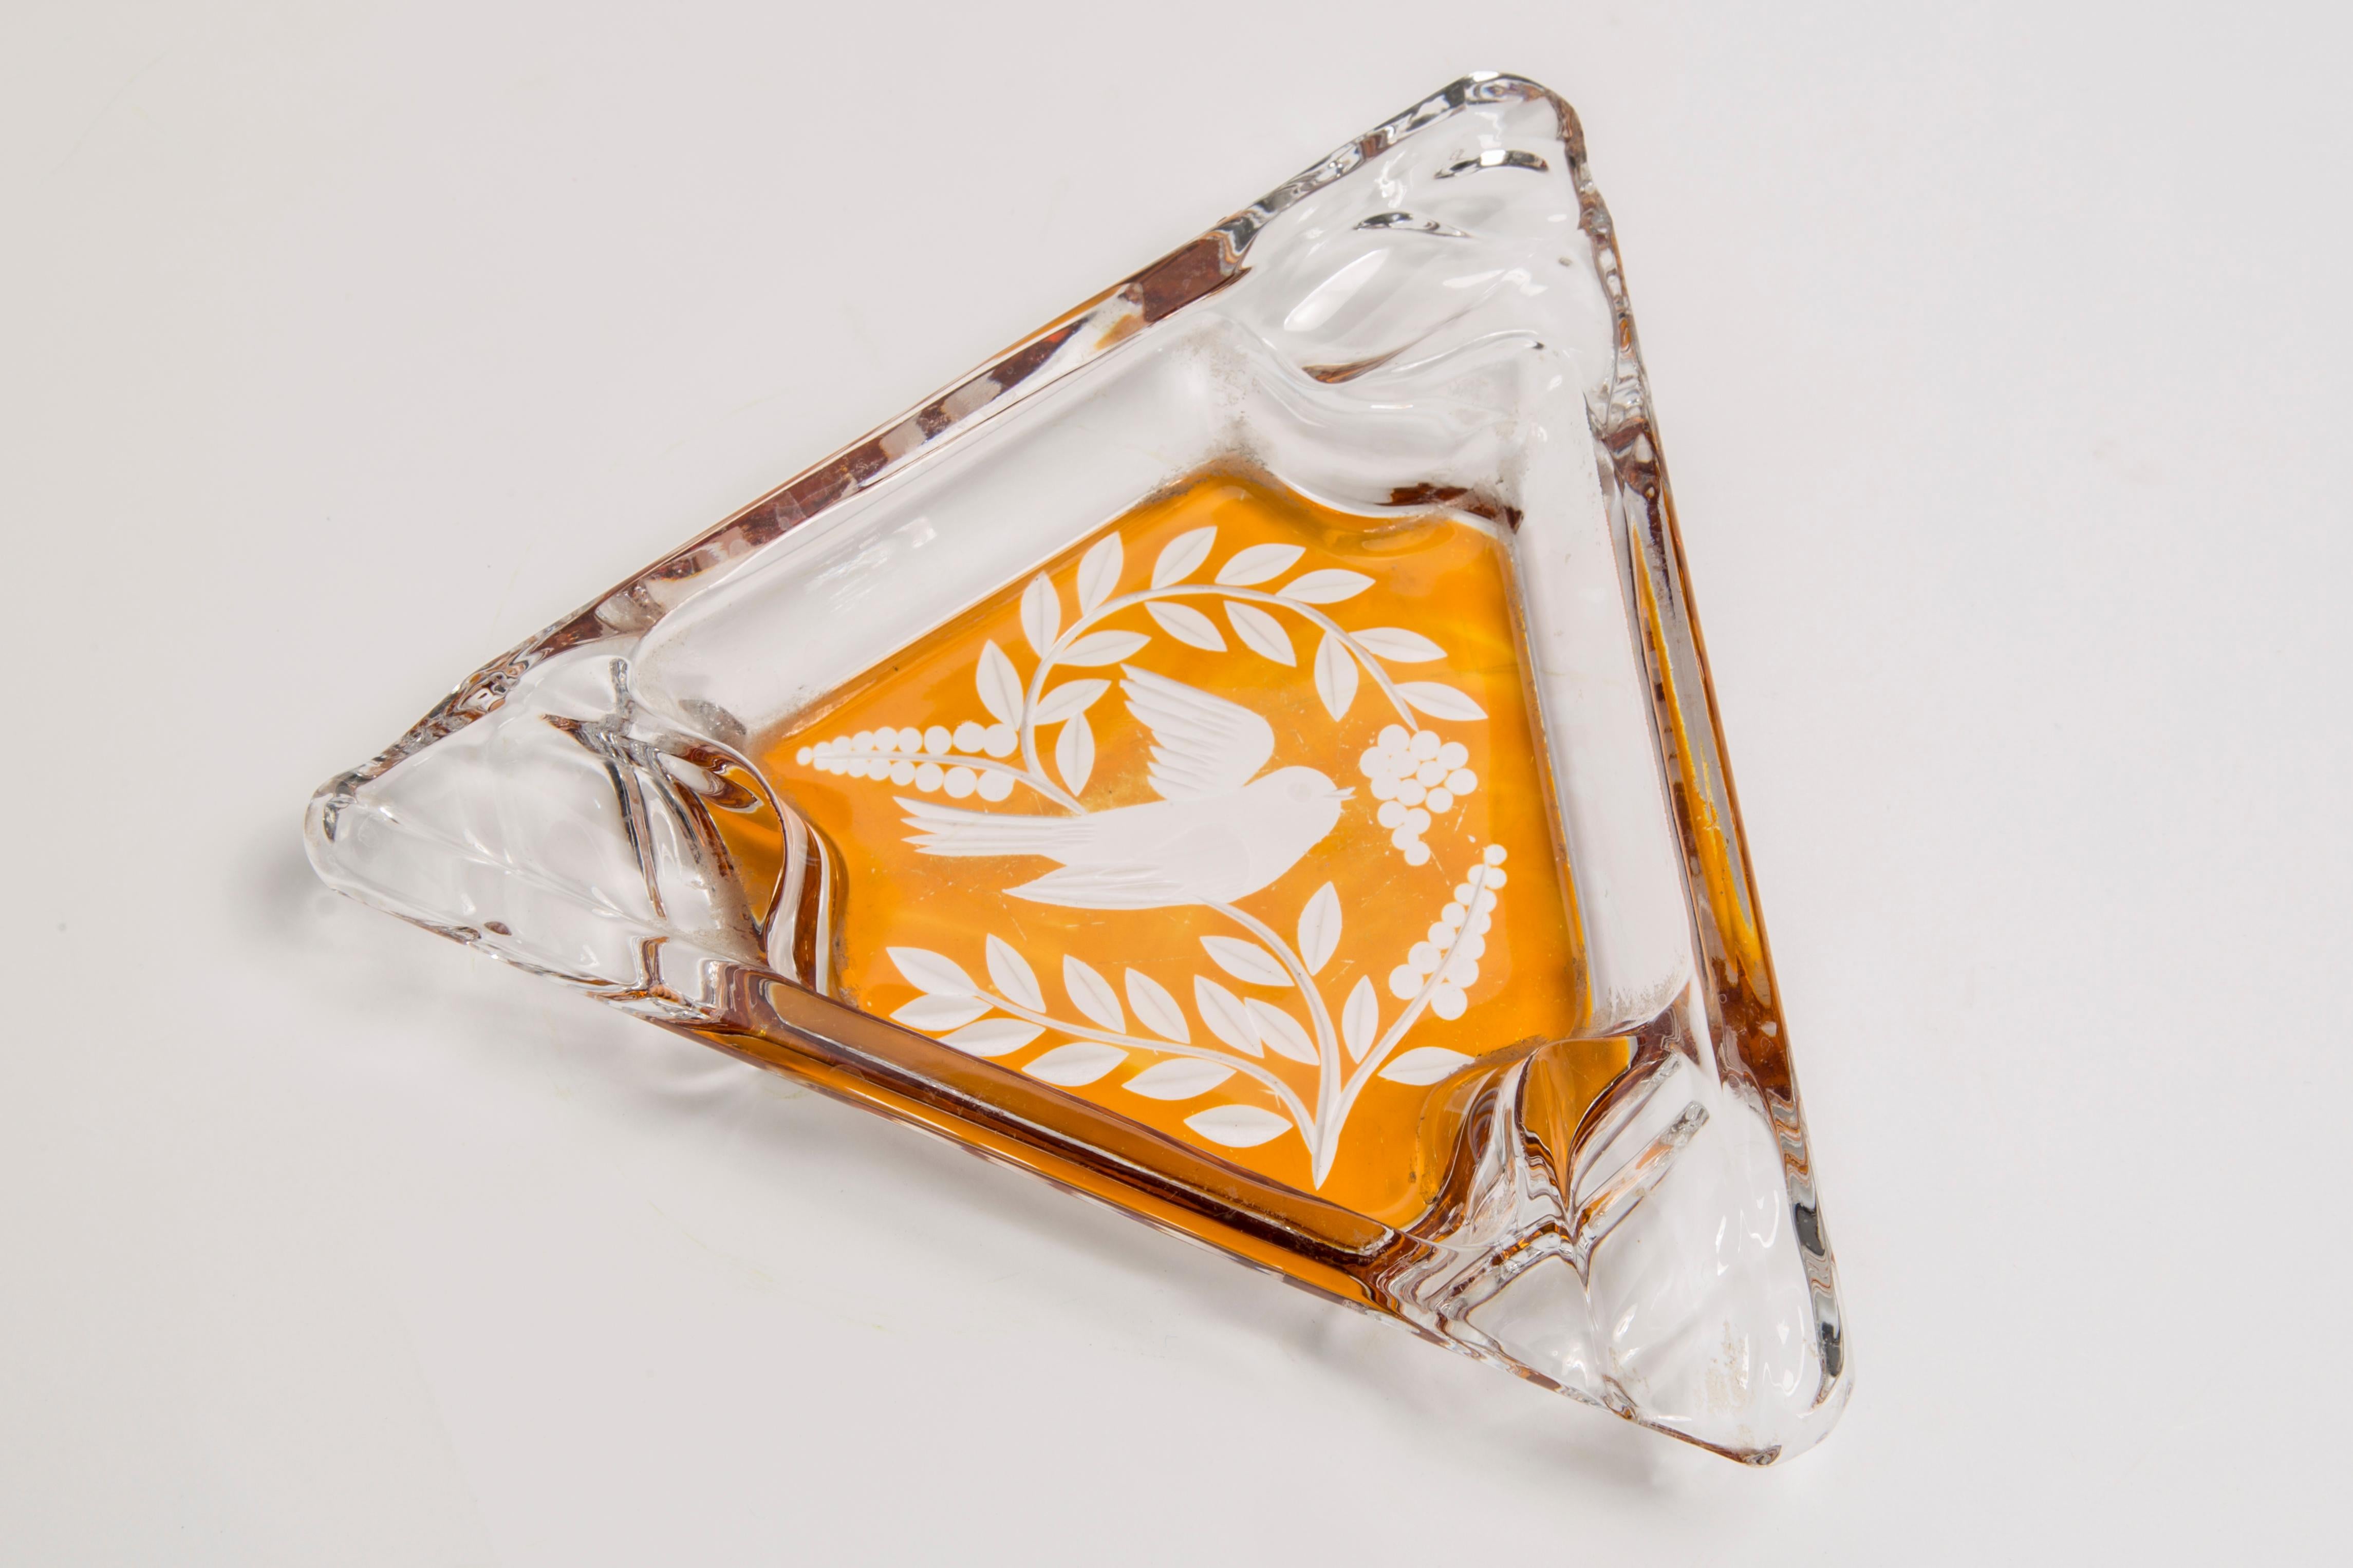 This original vintage glass ash tray bowl element was designed and produced in the 1970s in Lombardia, Italy. It is made in Sommerso Technique and has a fantastic faceted form. The vibrant color makes this items highly decorative. This item is a